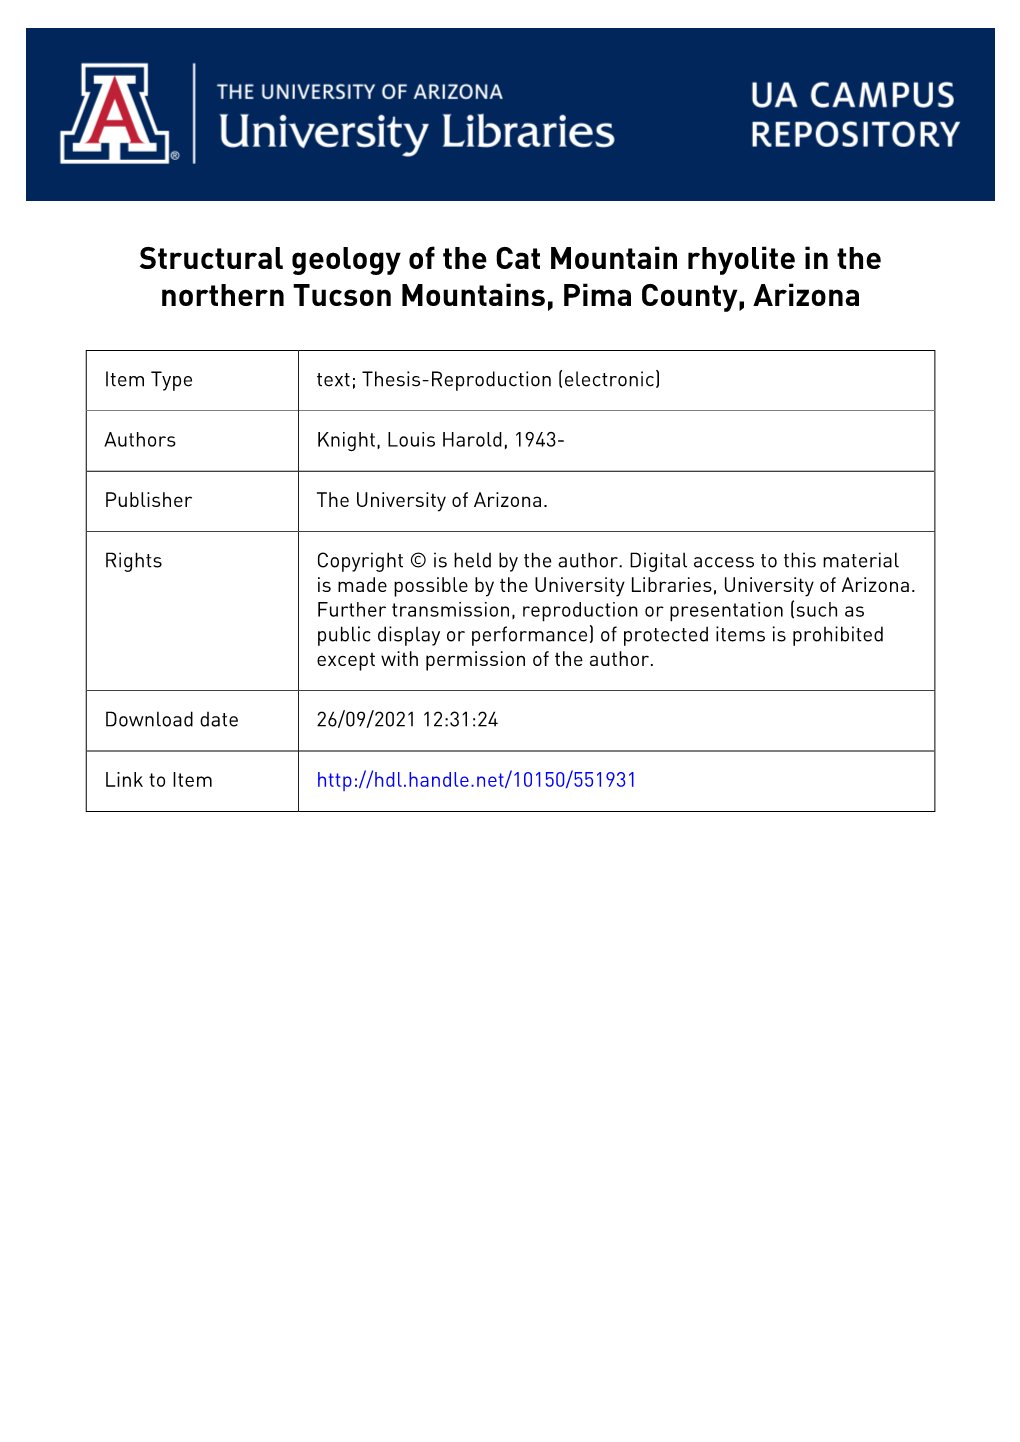 Structural Geology of the Cat Mountain Rhyolite in the Northern Tucson Mountains, Pima County, Arizona